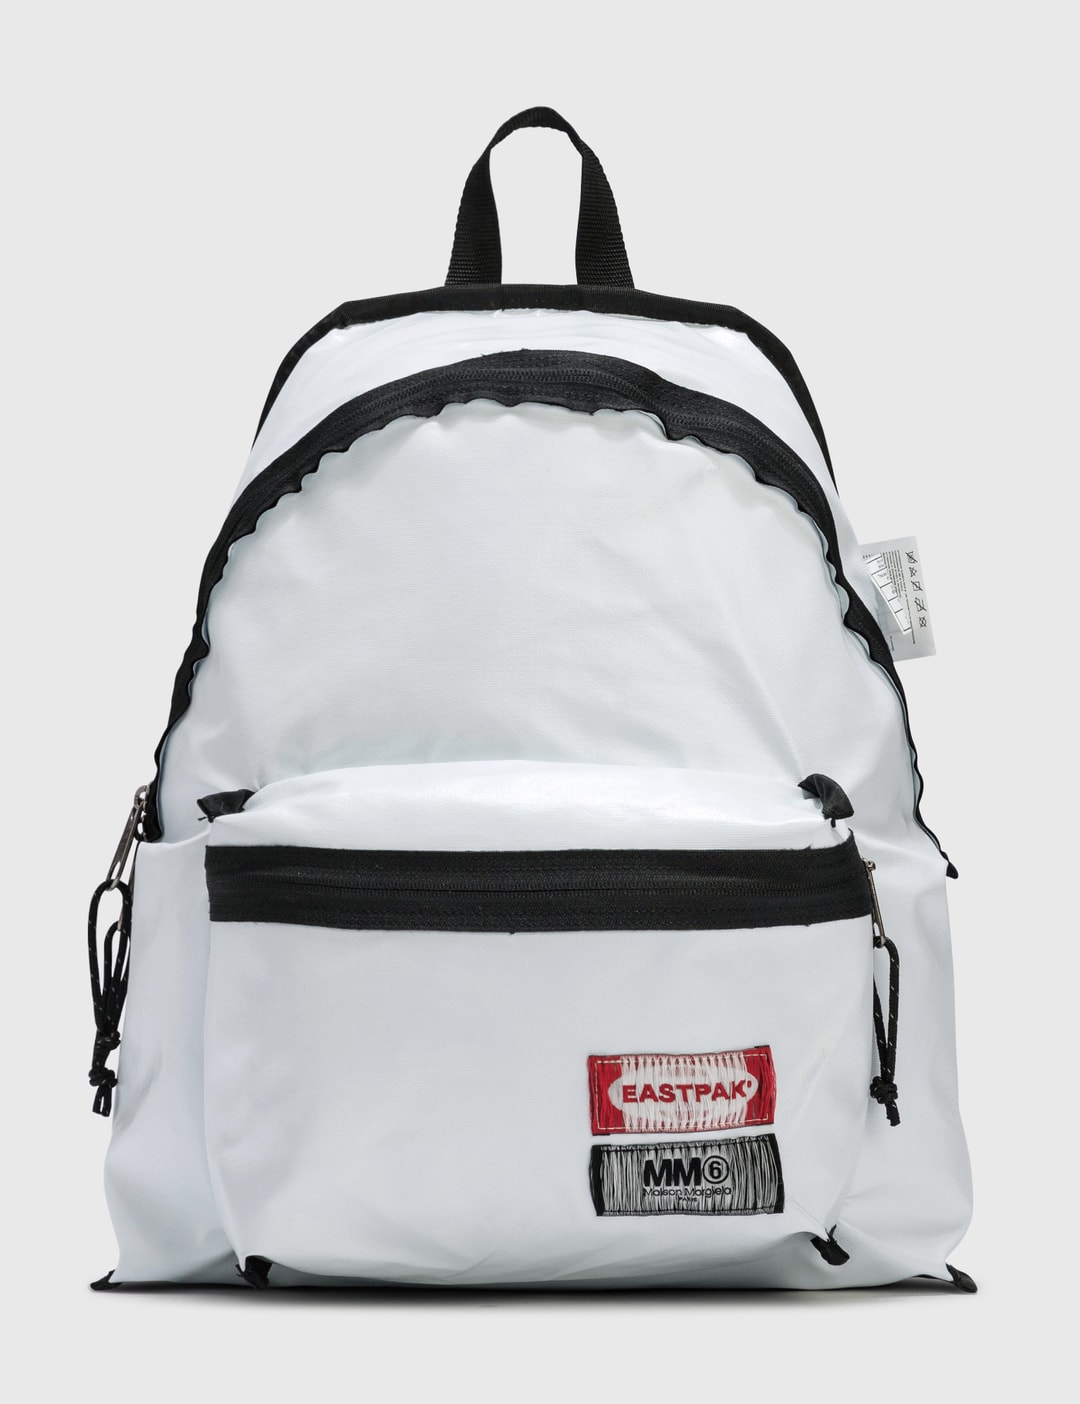 inhoudsopgave complicaties strand MM6 Maison Margiela - MM6 x Eastpak Reversible Inside-out Backpack | HBX -  Globally Curated Fashion and Lifestyle by Hypebeast